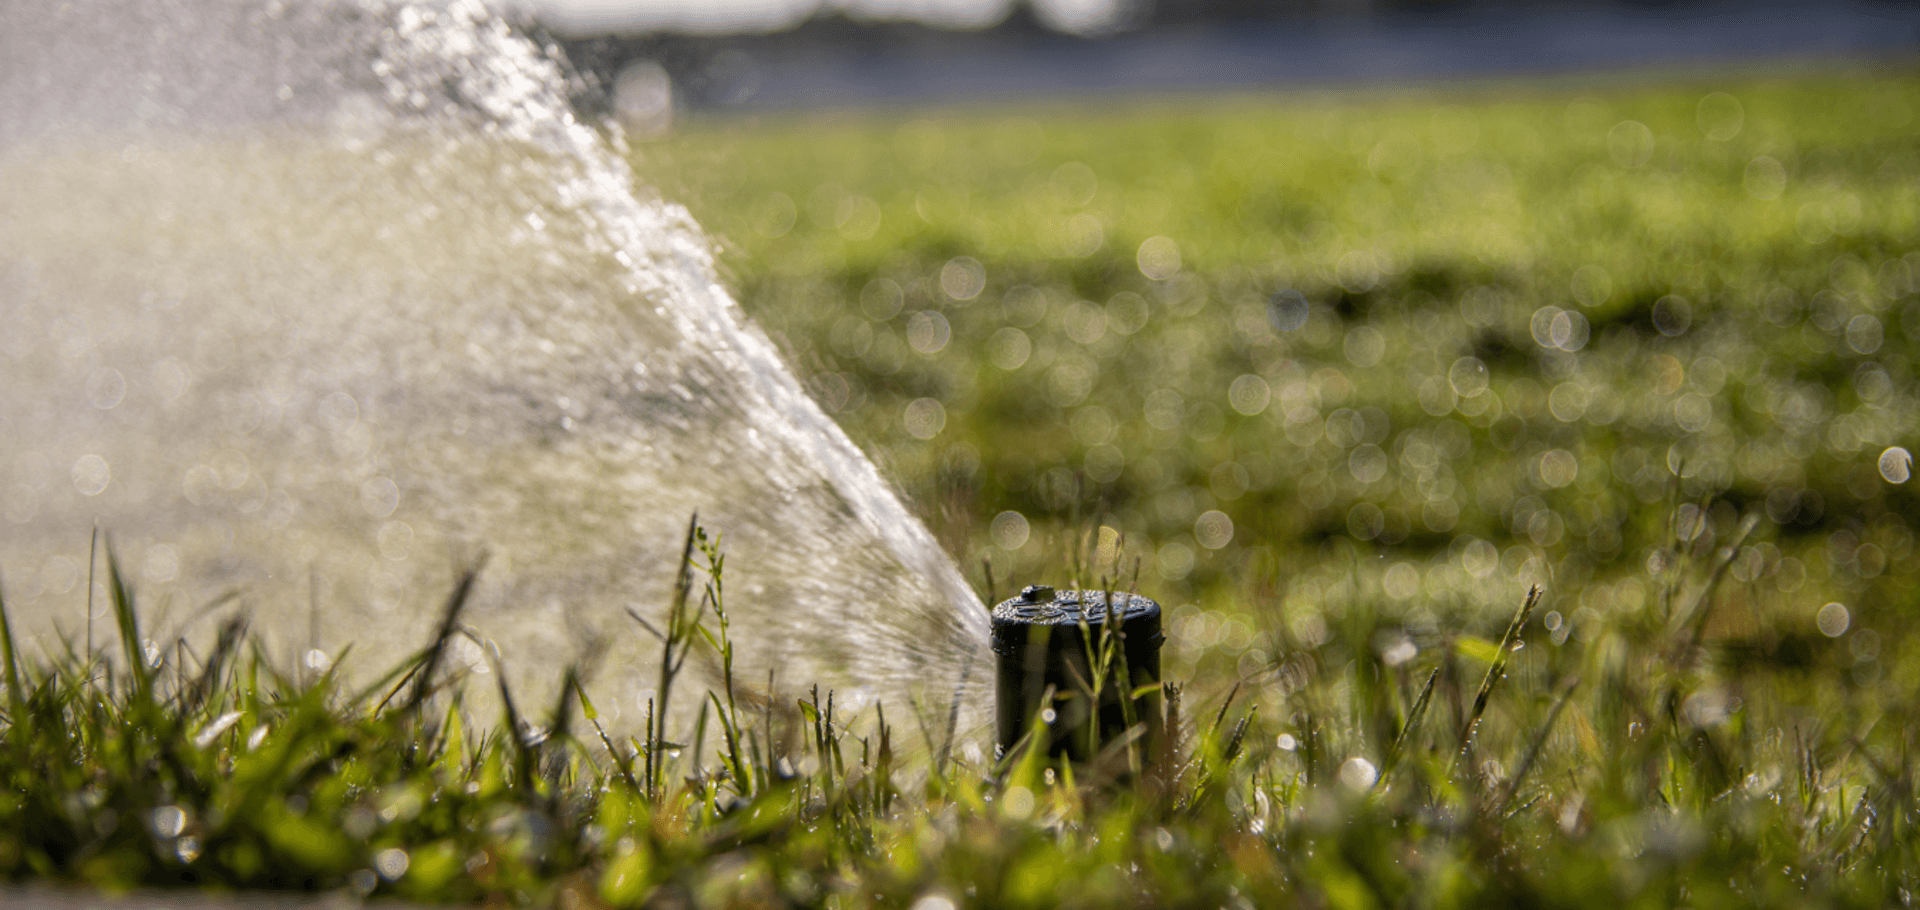 What season should you stop irrigation?